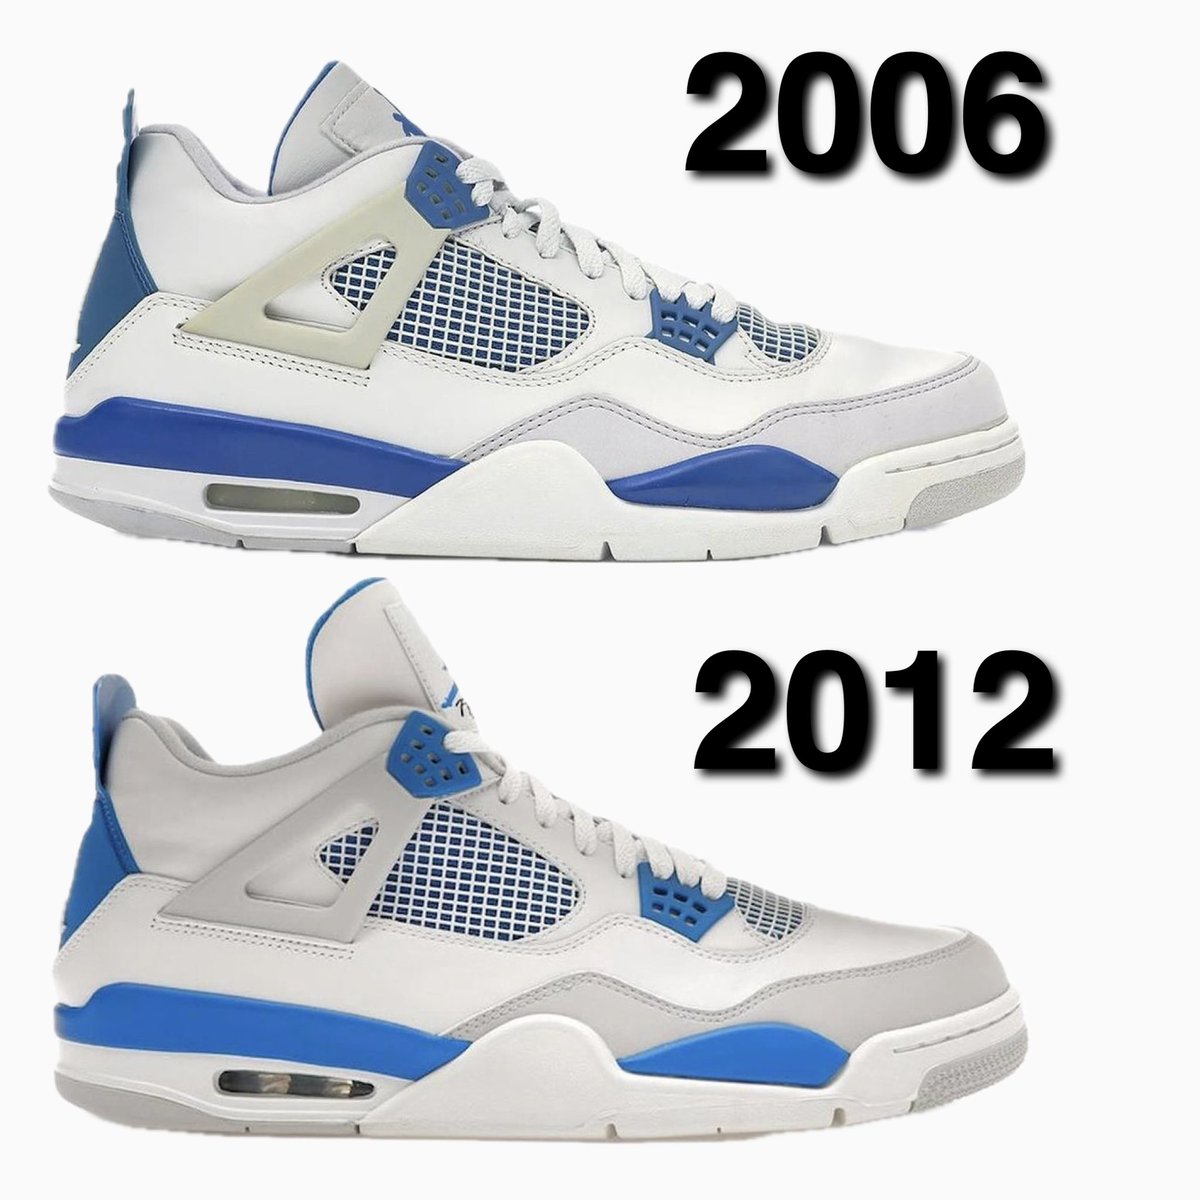 AIR JORDAN MILITARY BLUE THROUGH THE YEARS!!! WHICH IS YOUR FAVORITE!! AIR JORDAN 4 INDUSTRIAL BLUE 2024 BLUE IS CLOEST TO THE OG 1989 🔥🔥🔥